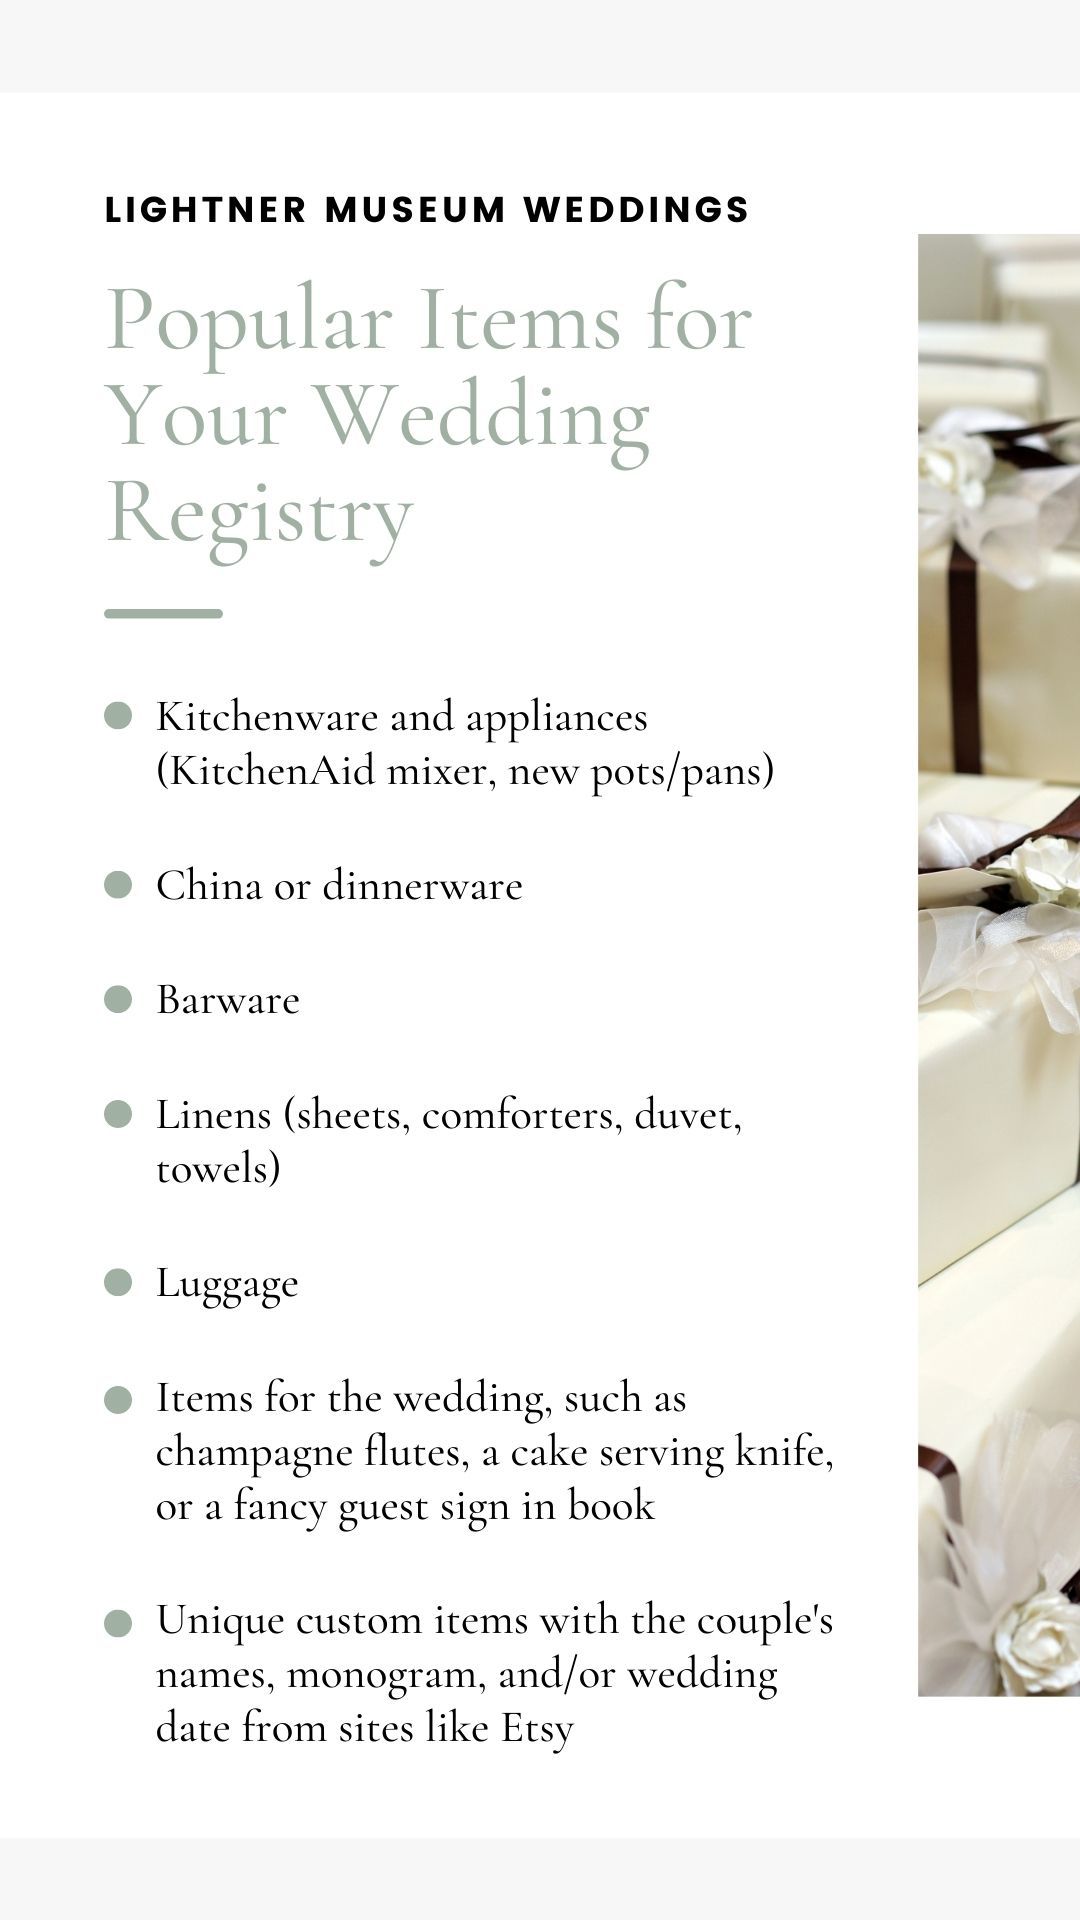 The most popular wedding registry items on